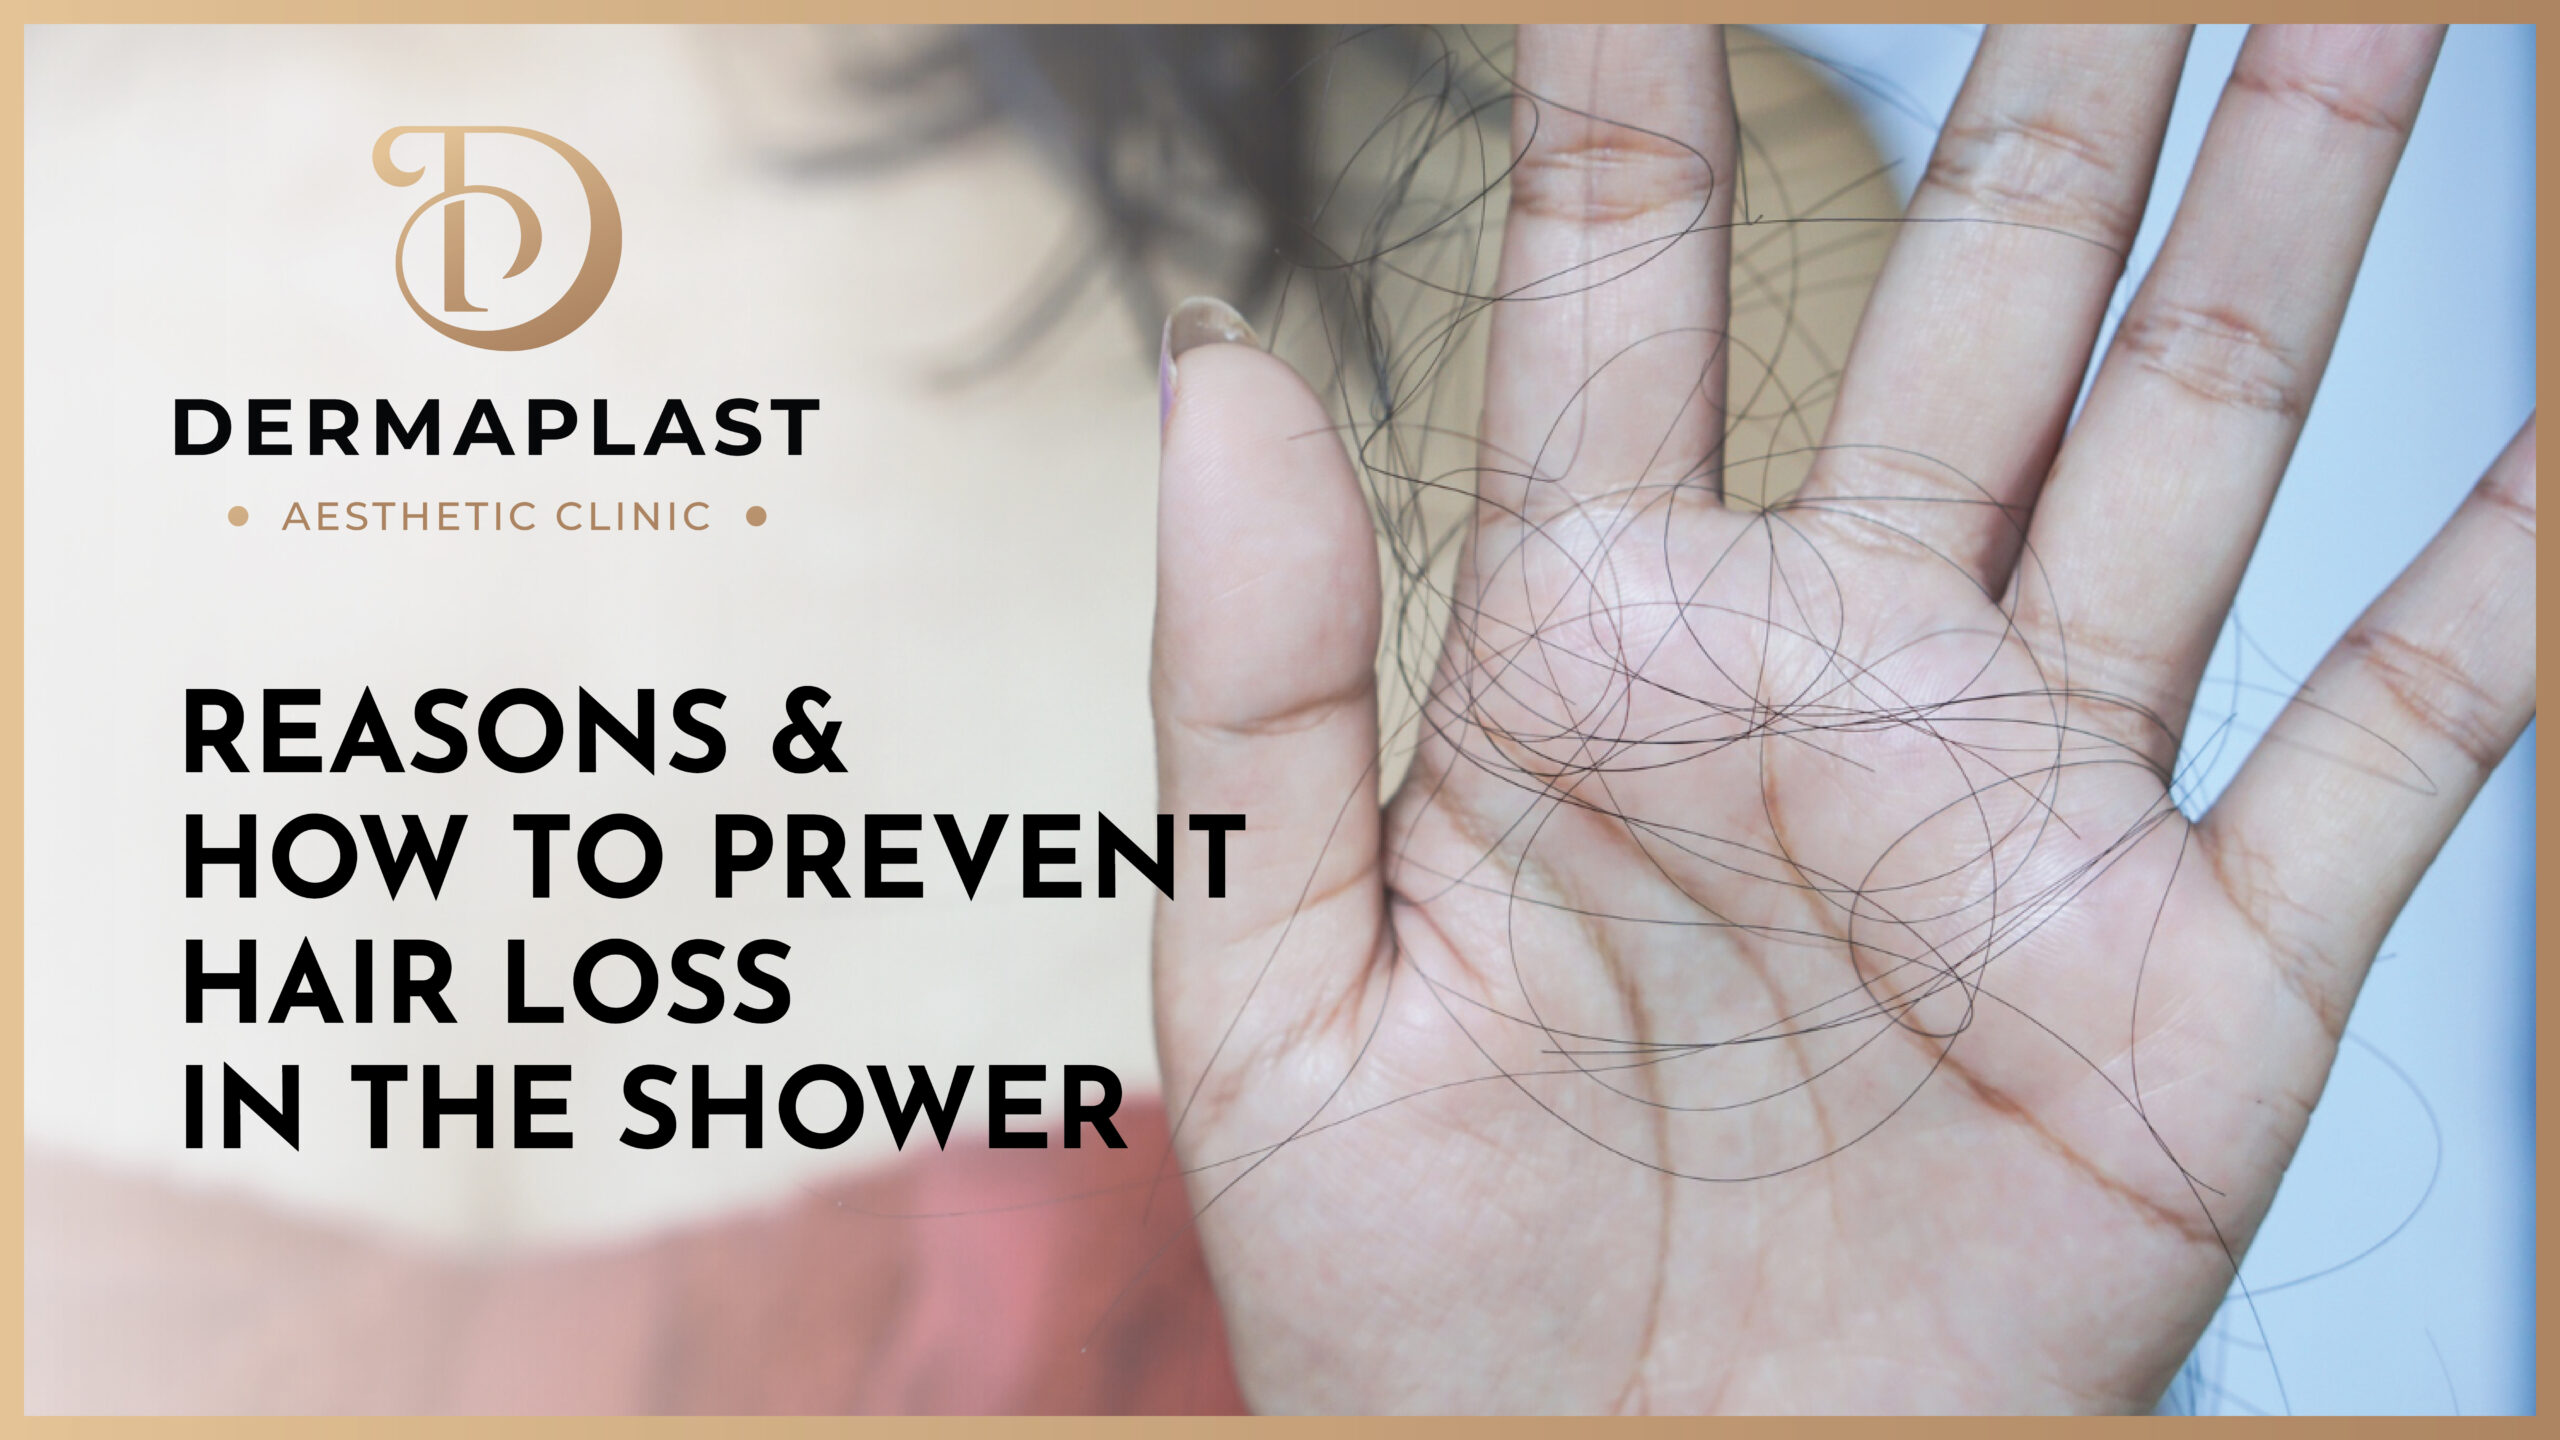 How to Prevent Hair Loss In The Shower